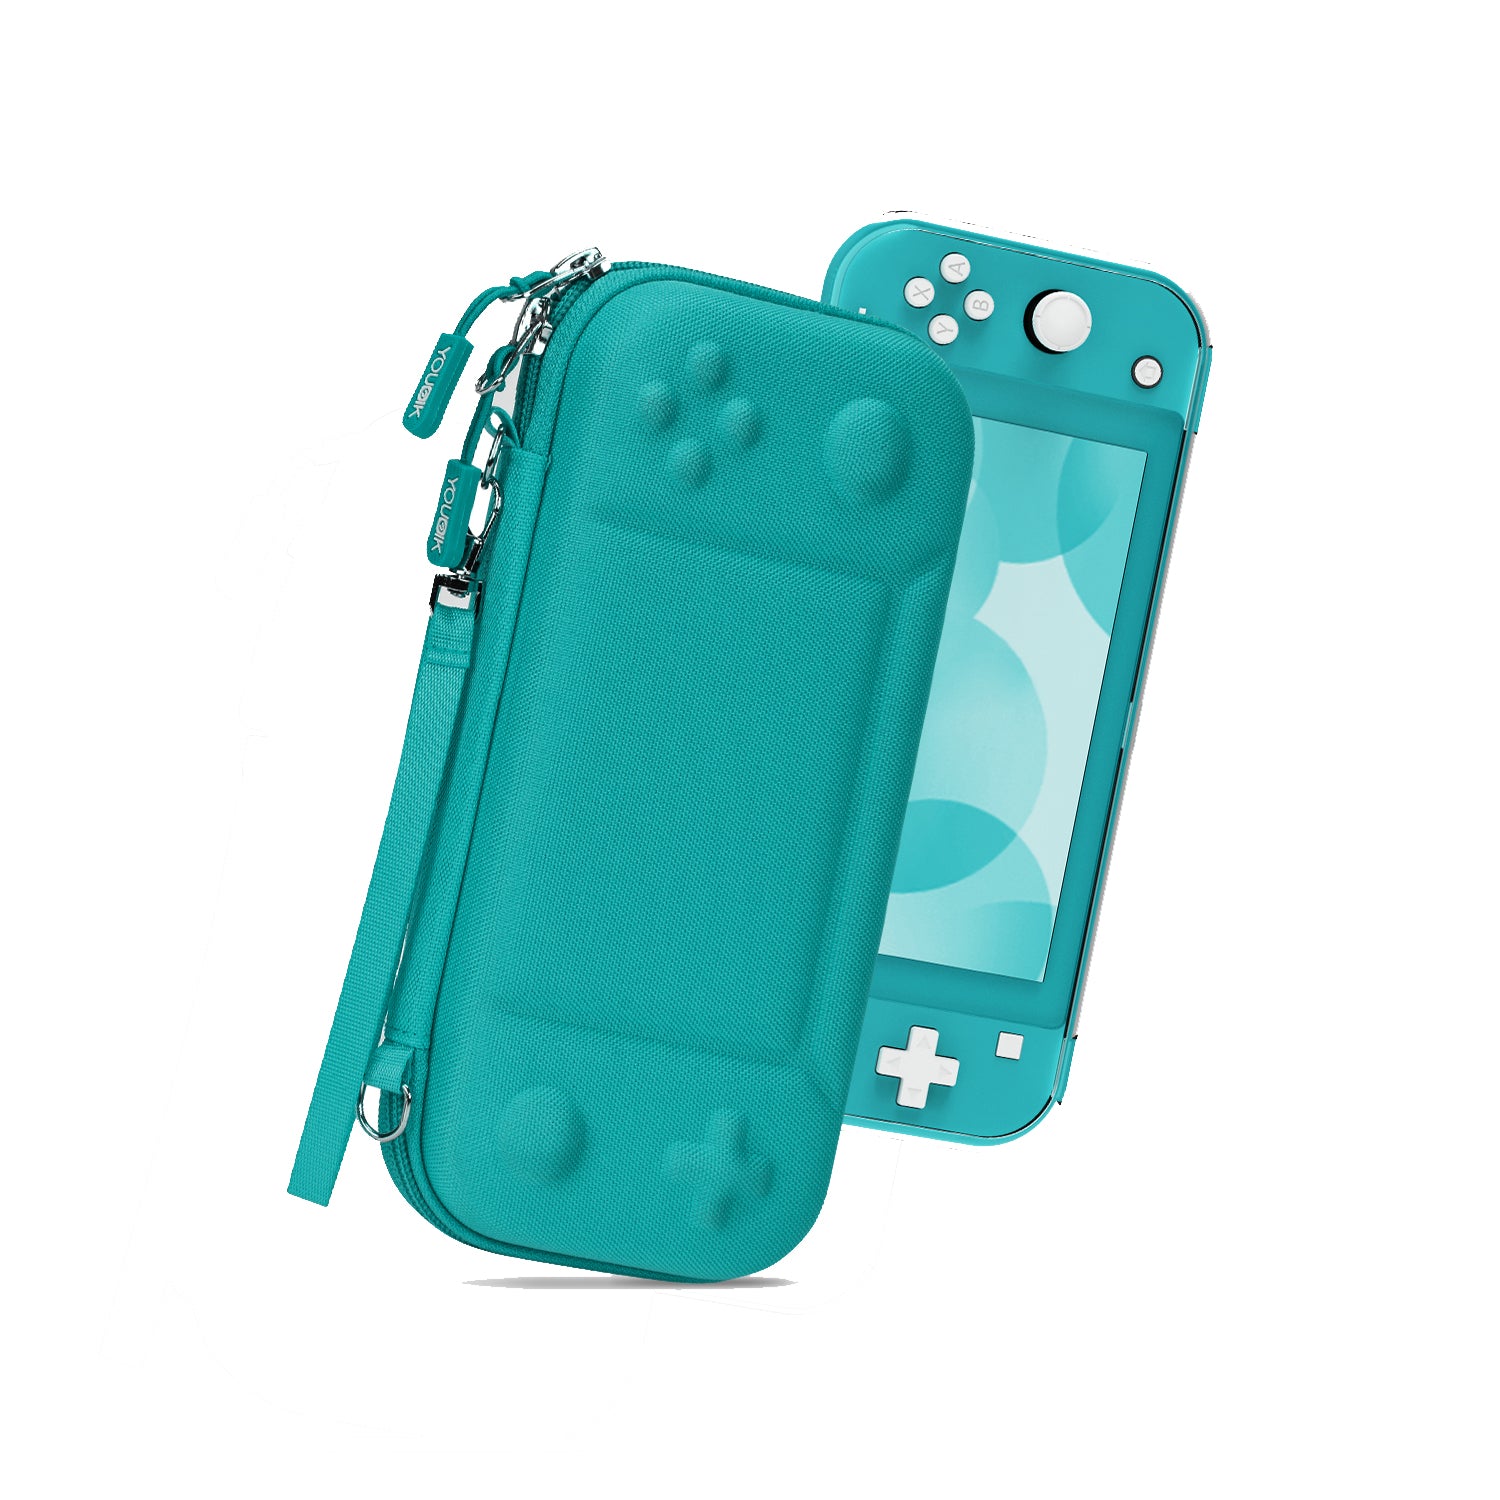 Younik Switch Lite Protective Case, Carrying Case for Switch Lite